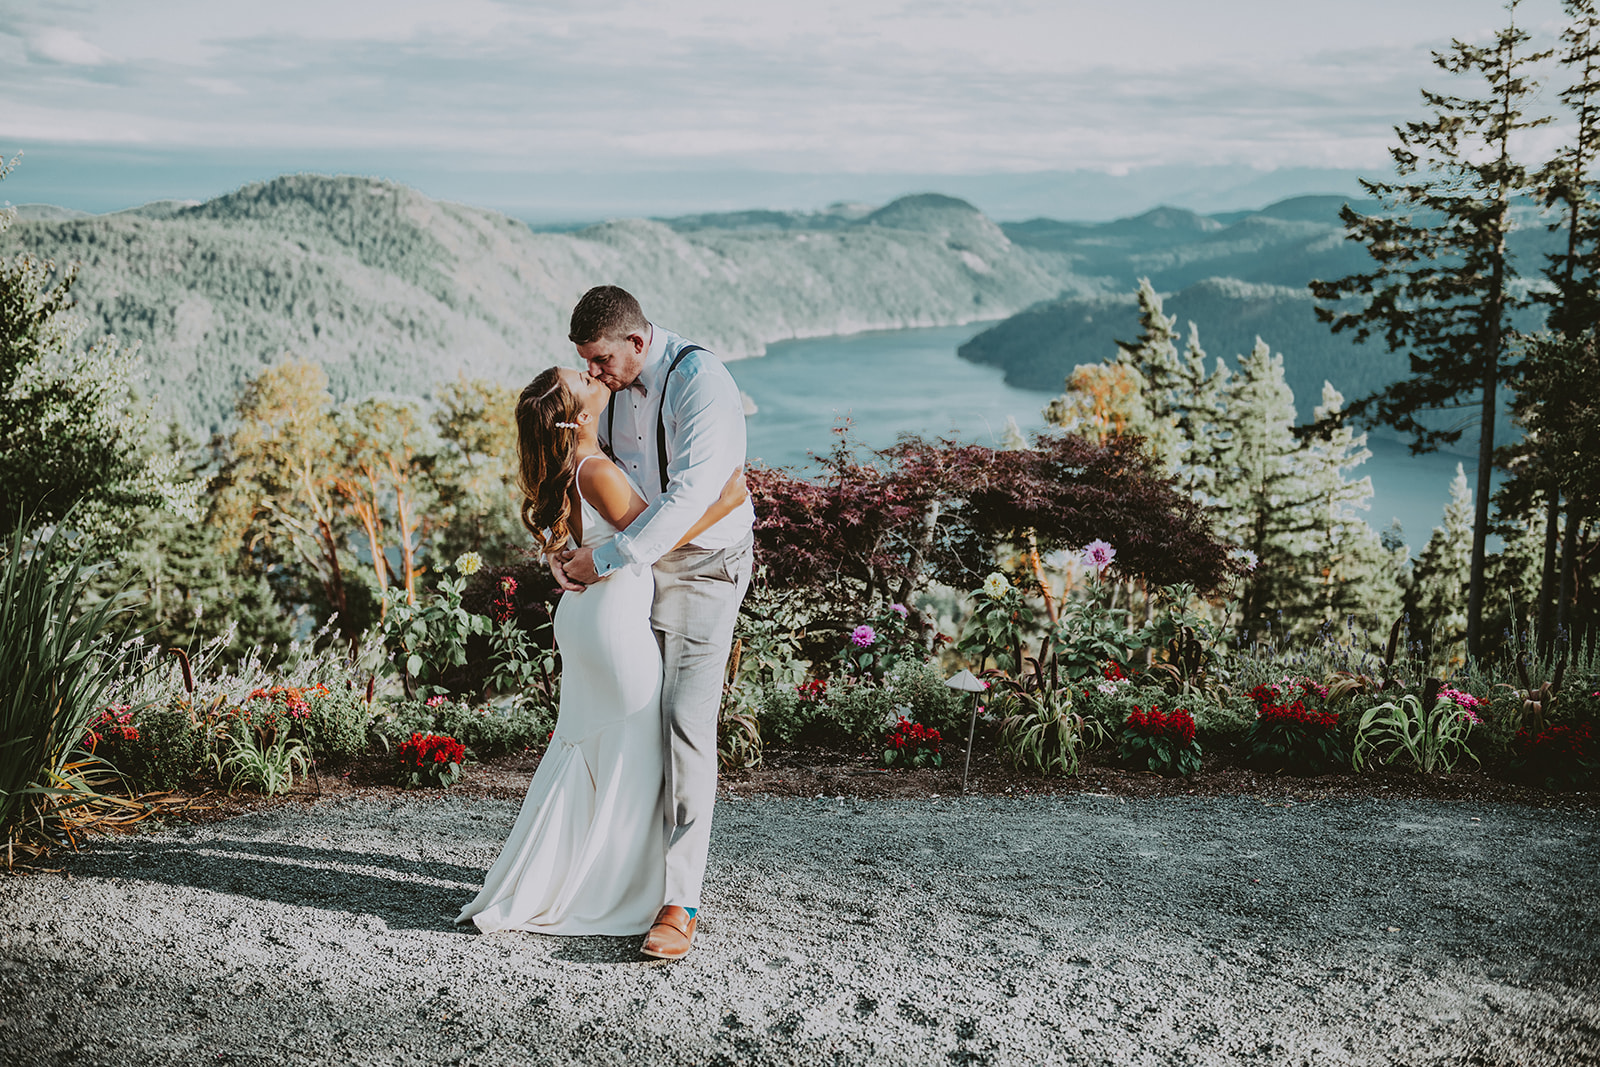 Vancouver Island Wedding at its best